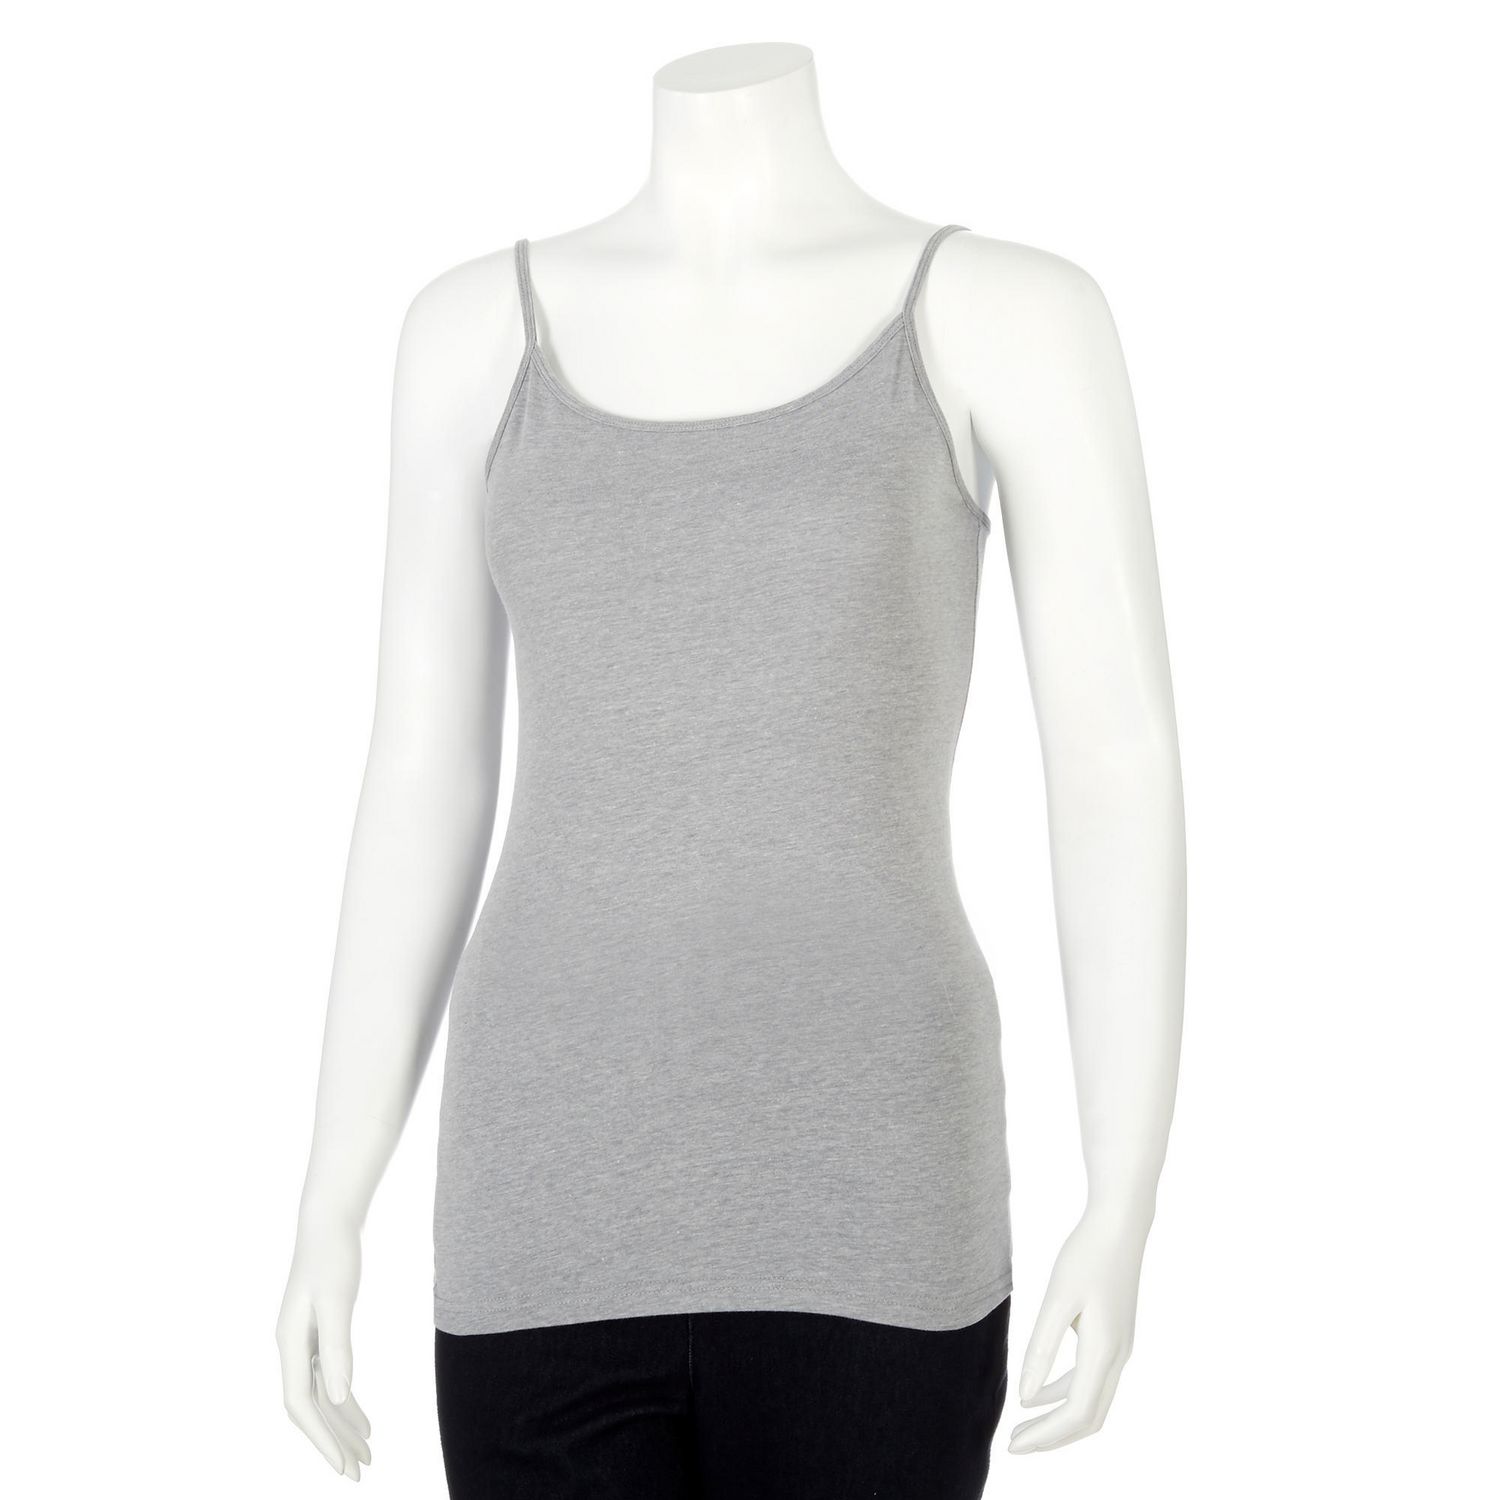 George Women’s Fitted Cami | Walmart Canada